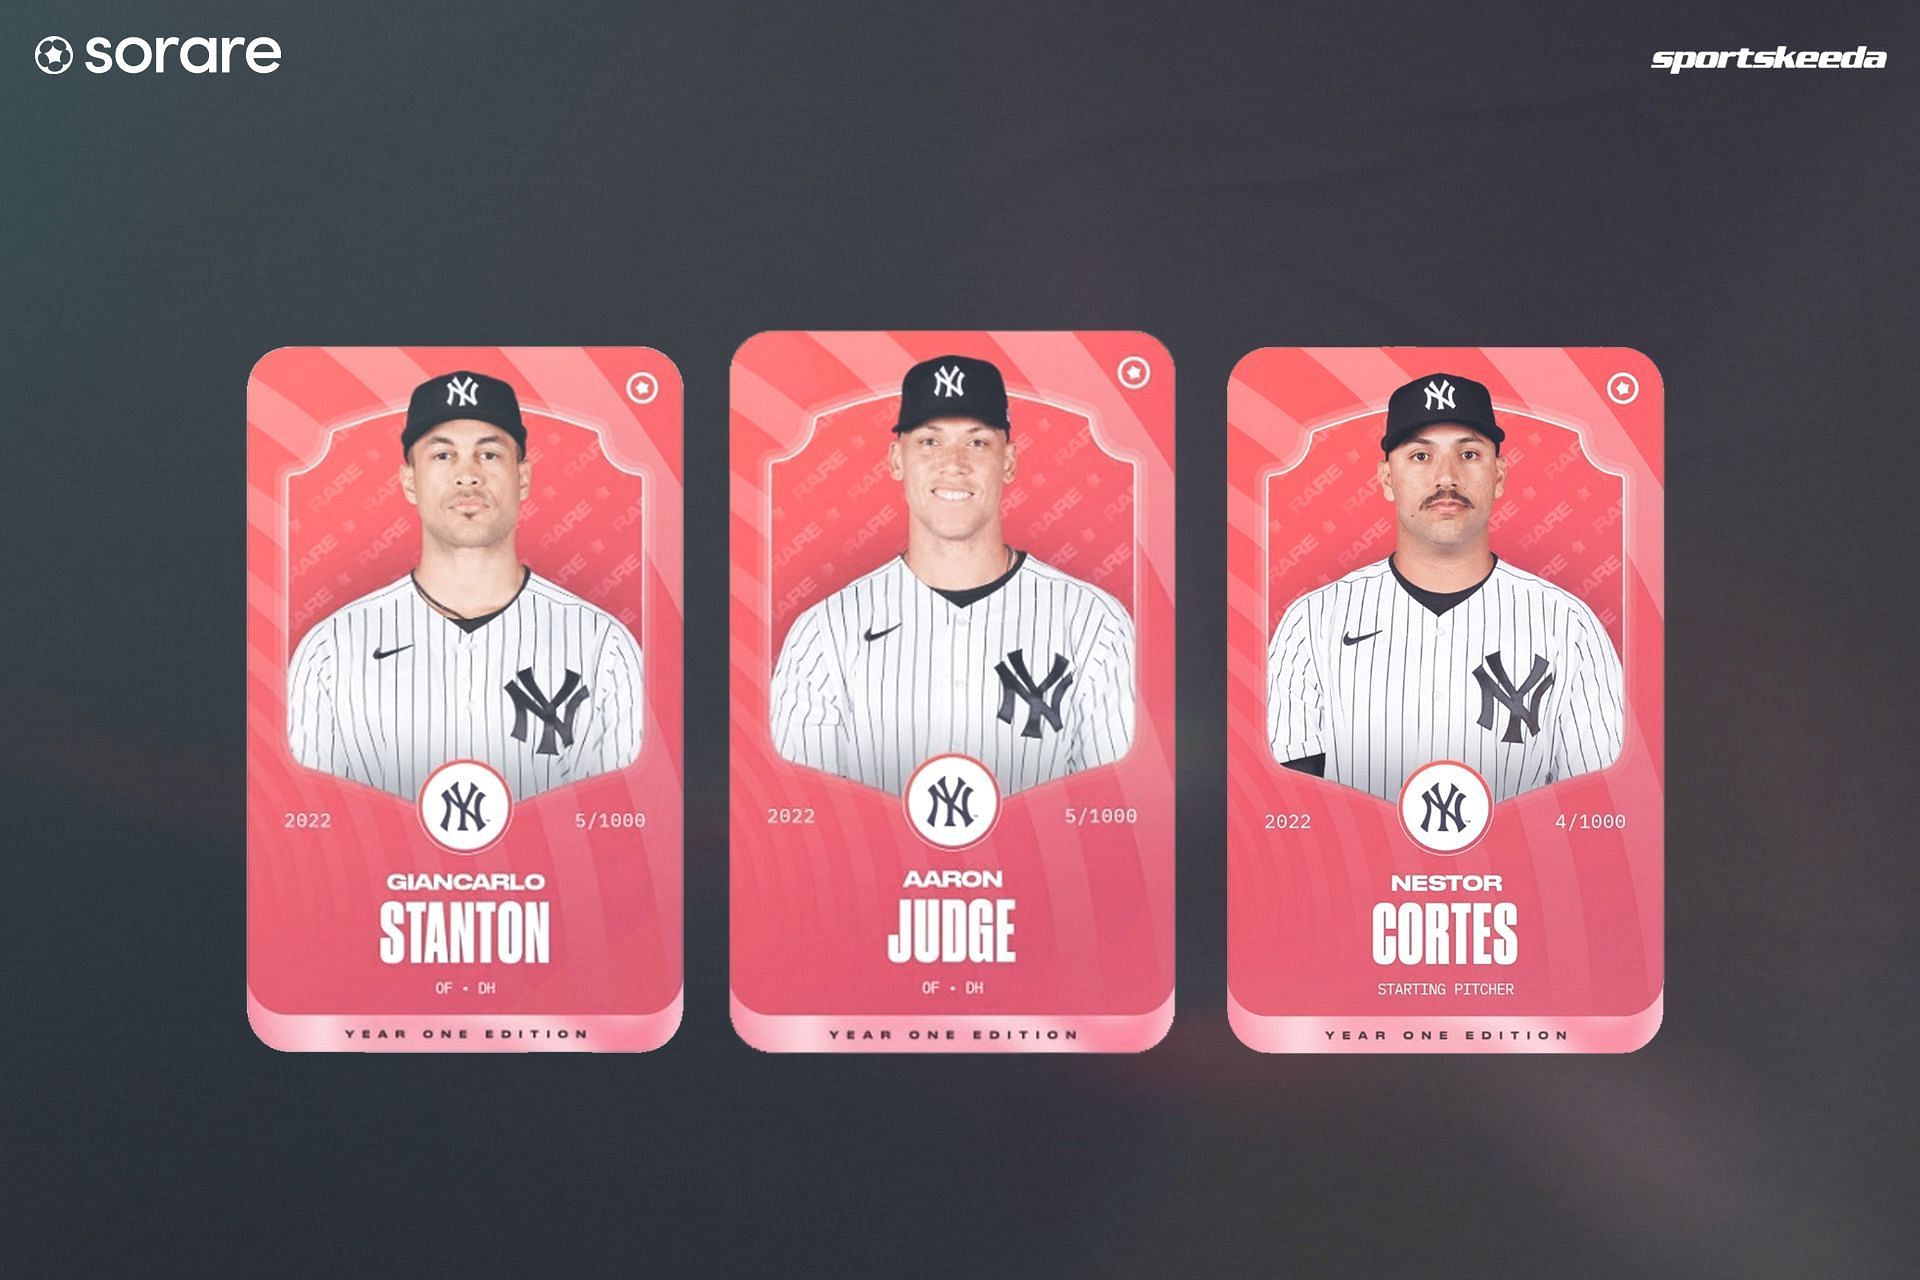 Giancarlo Stanton (left), Aaron Judge (middle) and Nestor Cortes (right) can all be found on MLB Sorare.